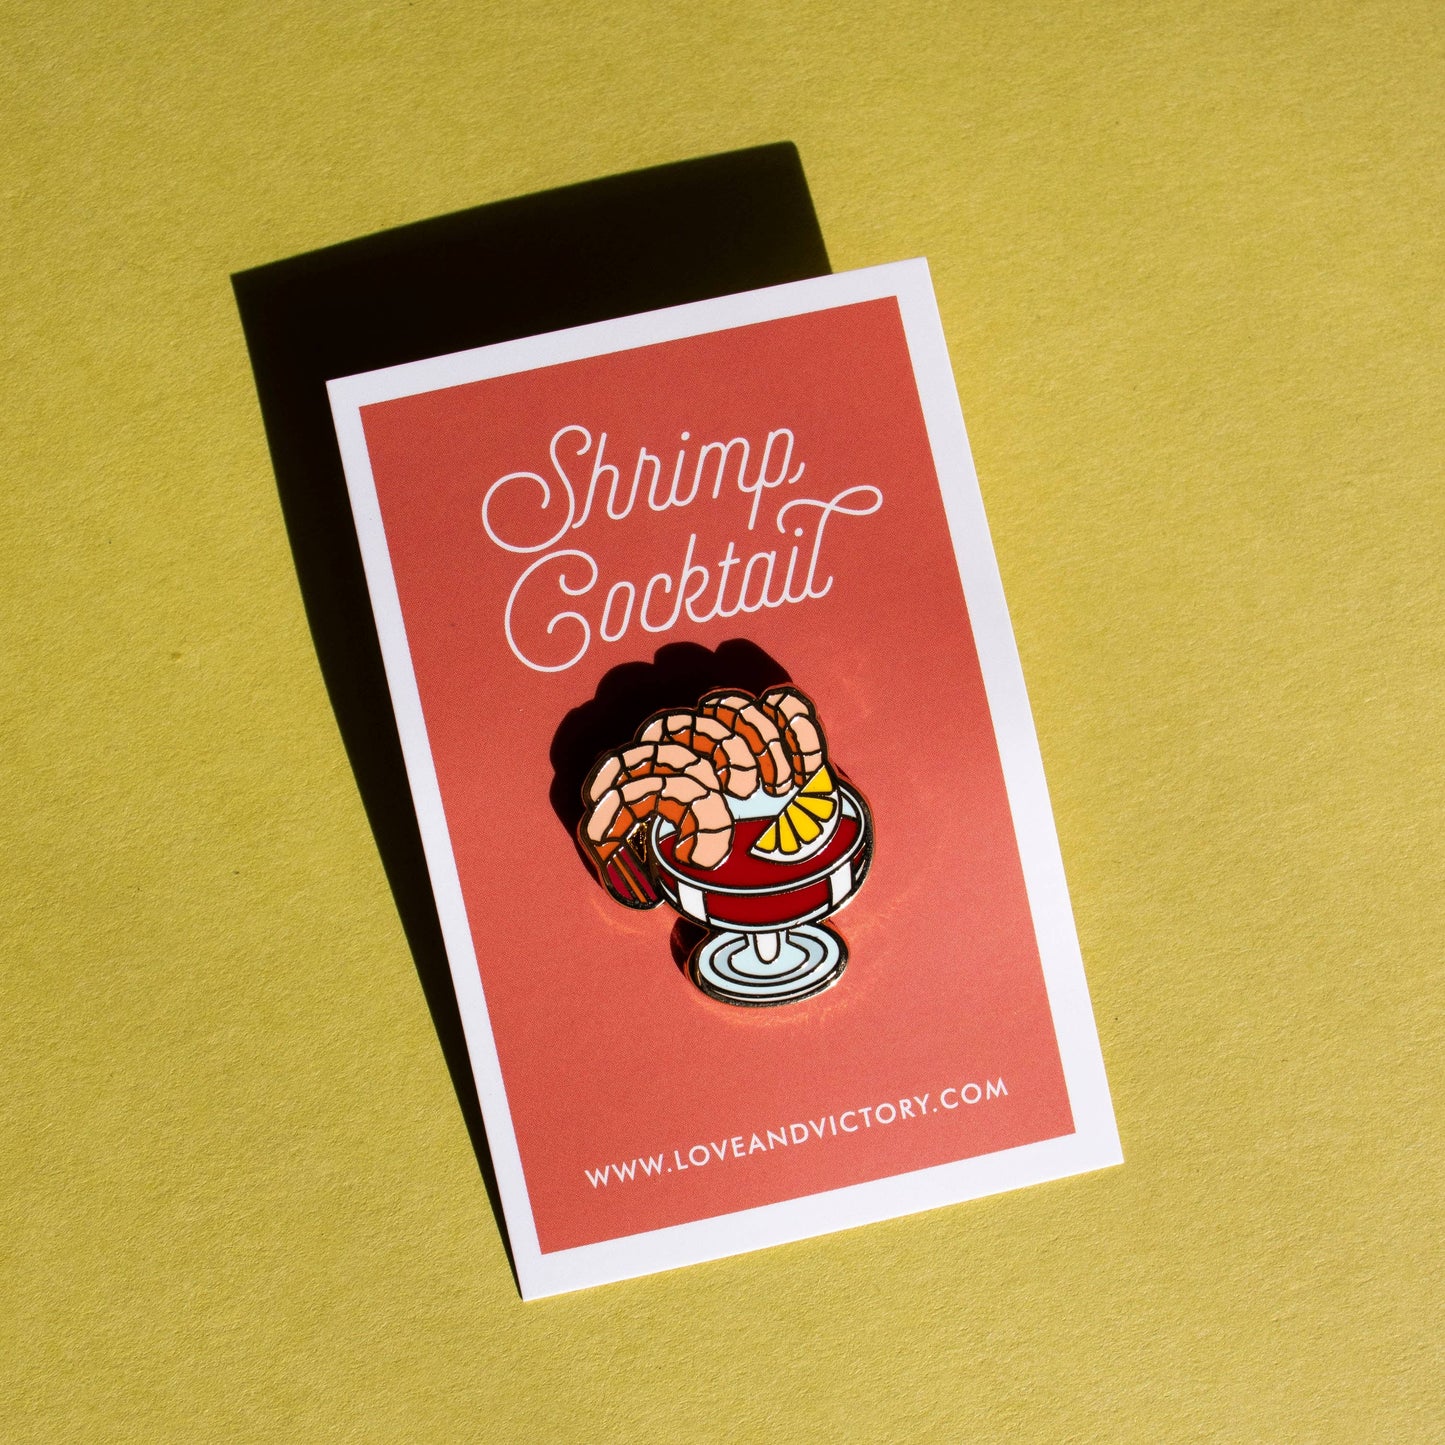 Shrimp cocktail lapel pin on red card backing that reads "Shrimp Cocktail" 